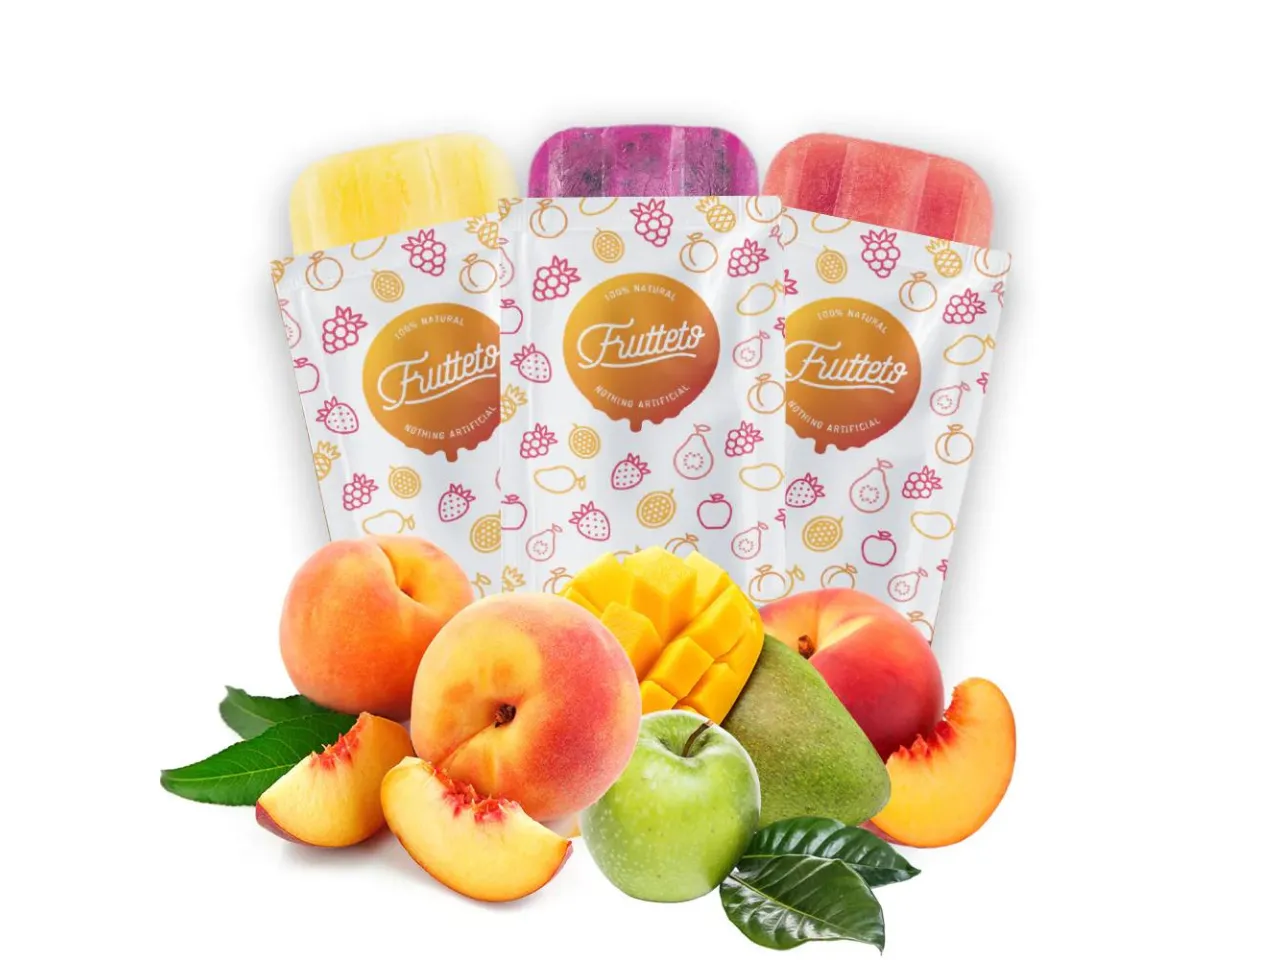 https://godesi.in/products/ice-popz-12-pack-assorted-4-flavours-fruit-ice-popsicles-ice-pops-70ml-each-masala-cola-truly-mango-very-berry-tangy-imli